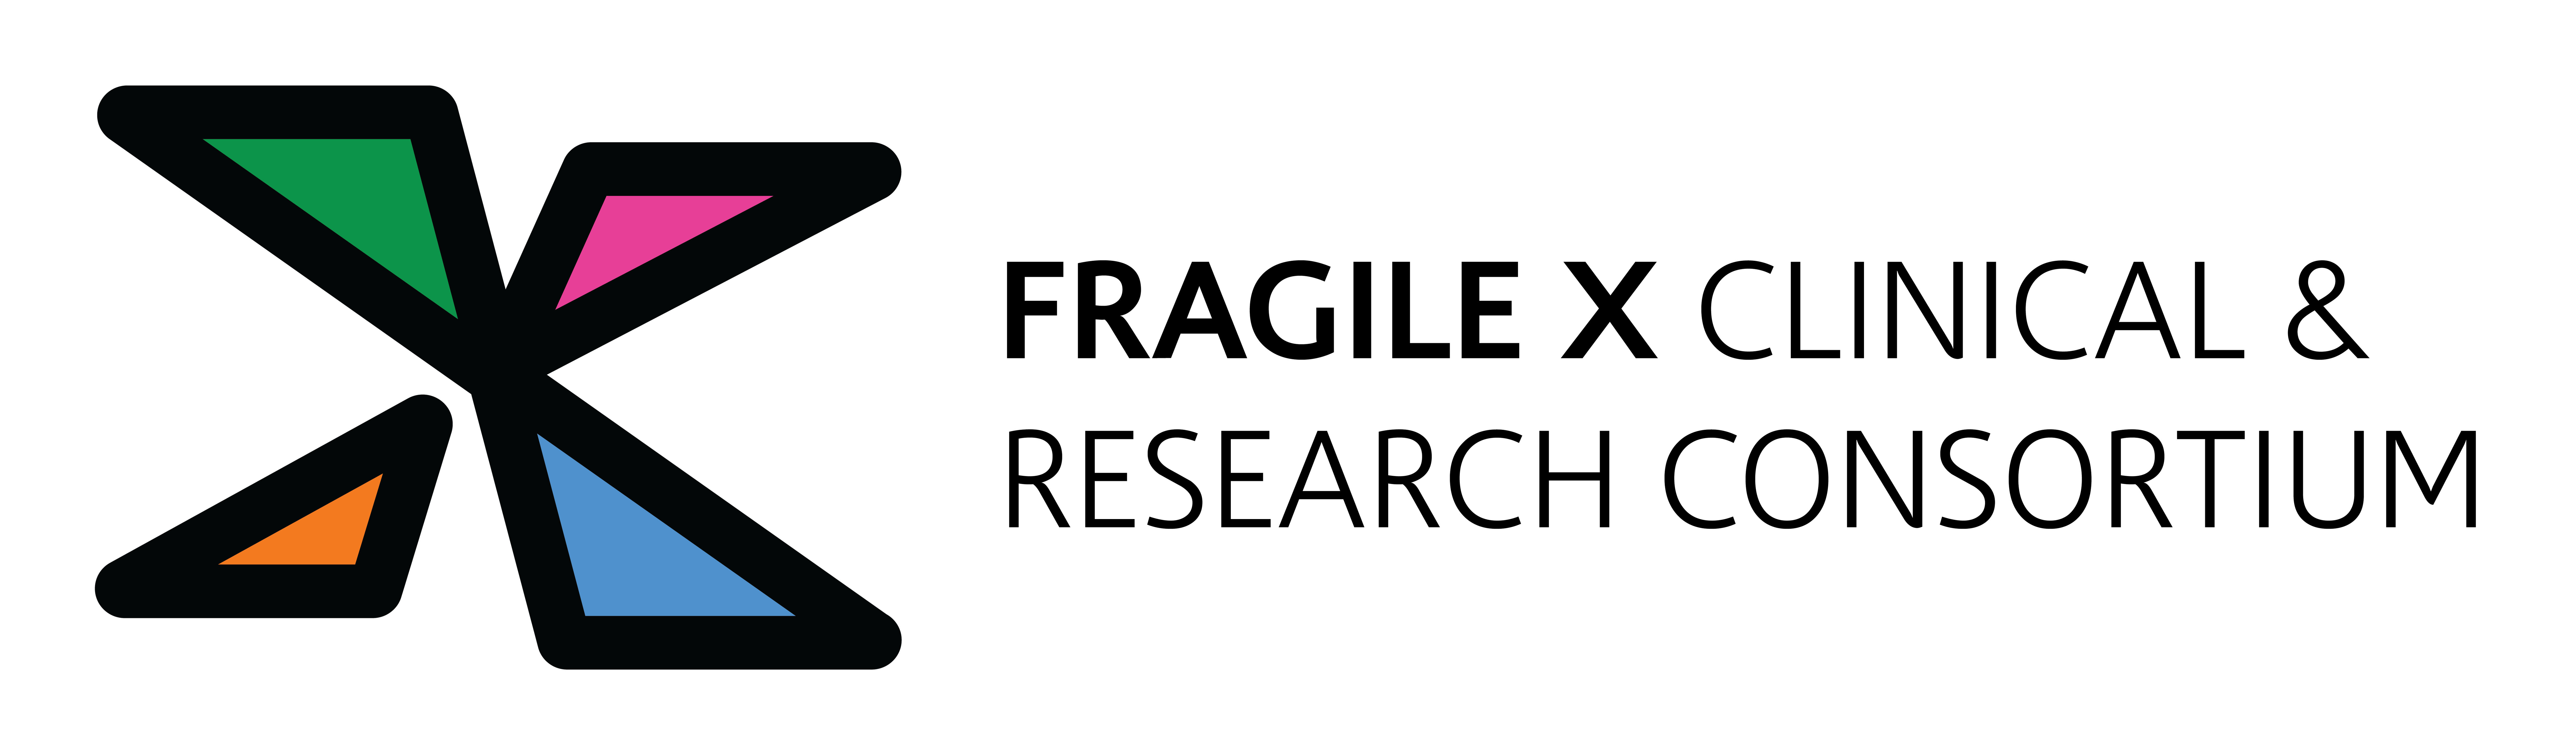 Fragile X Clinical and Research Consortium logo